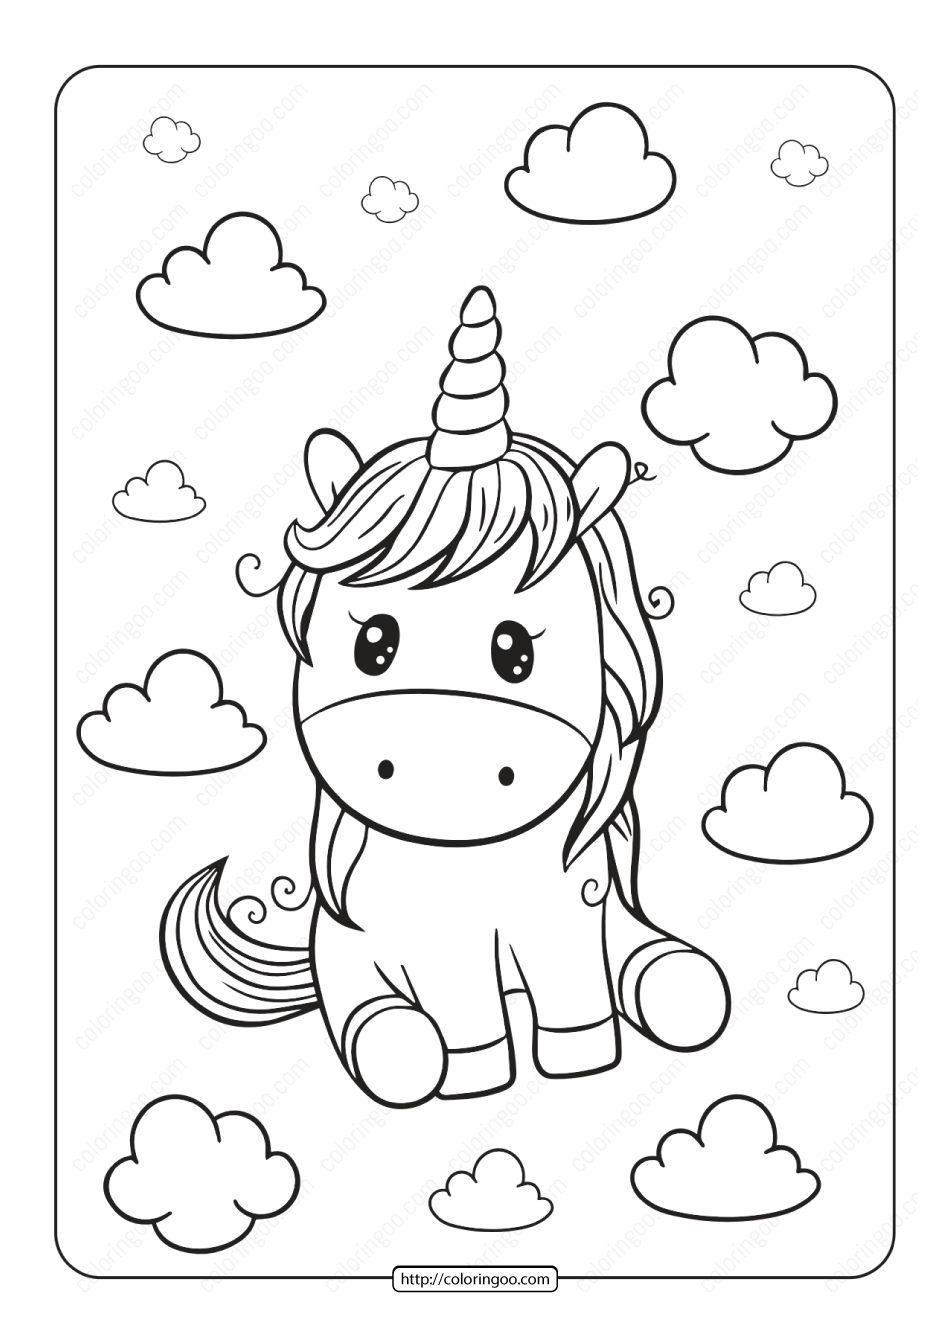 Unicorn Coloring Pages 05